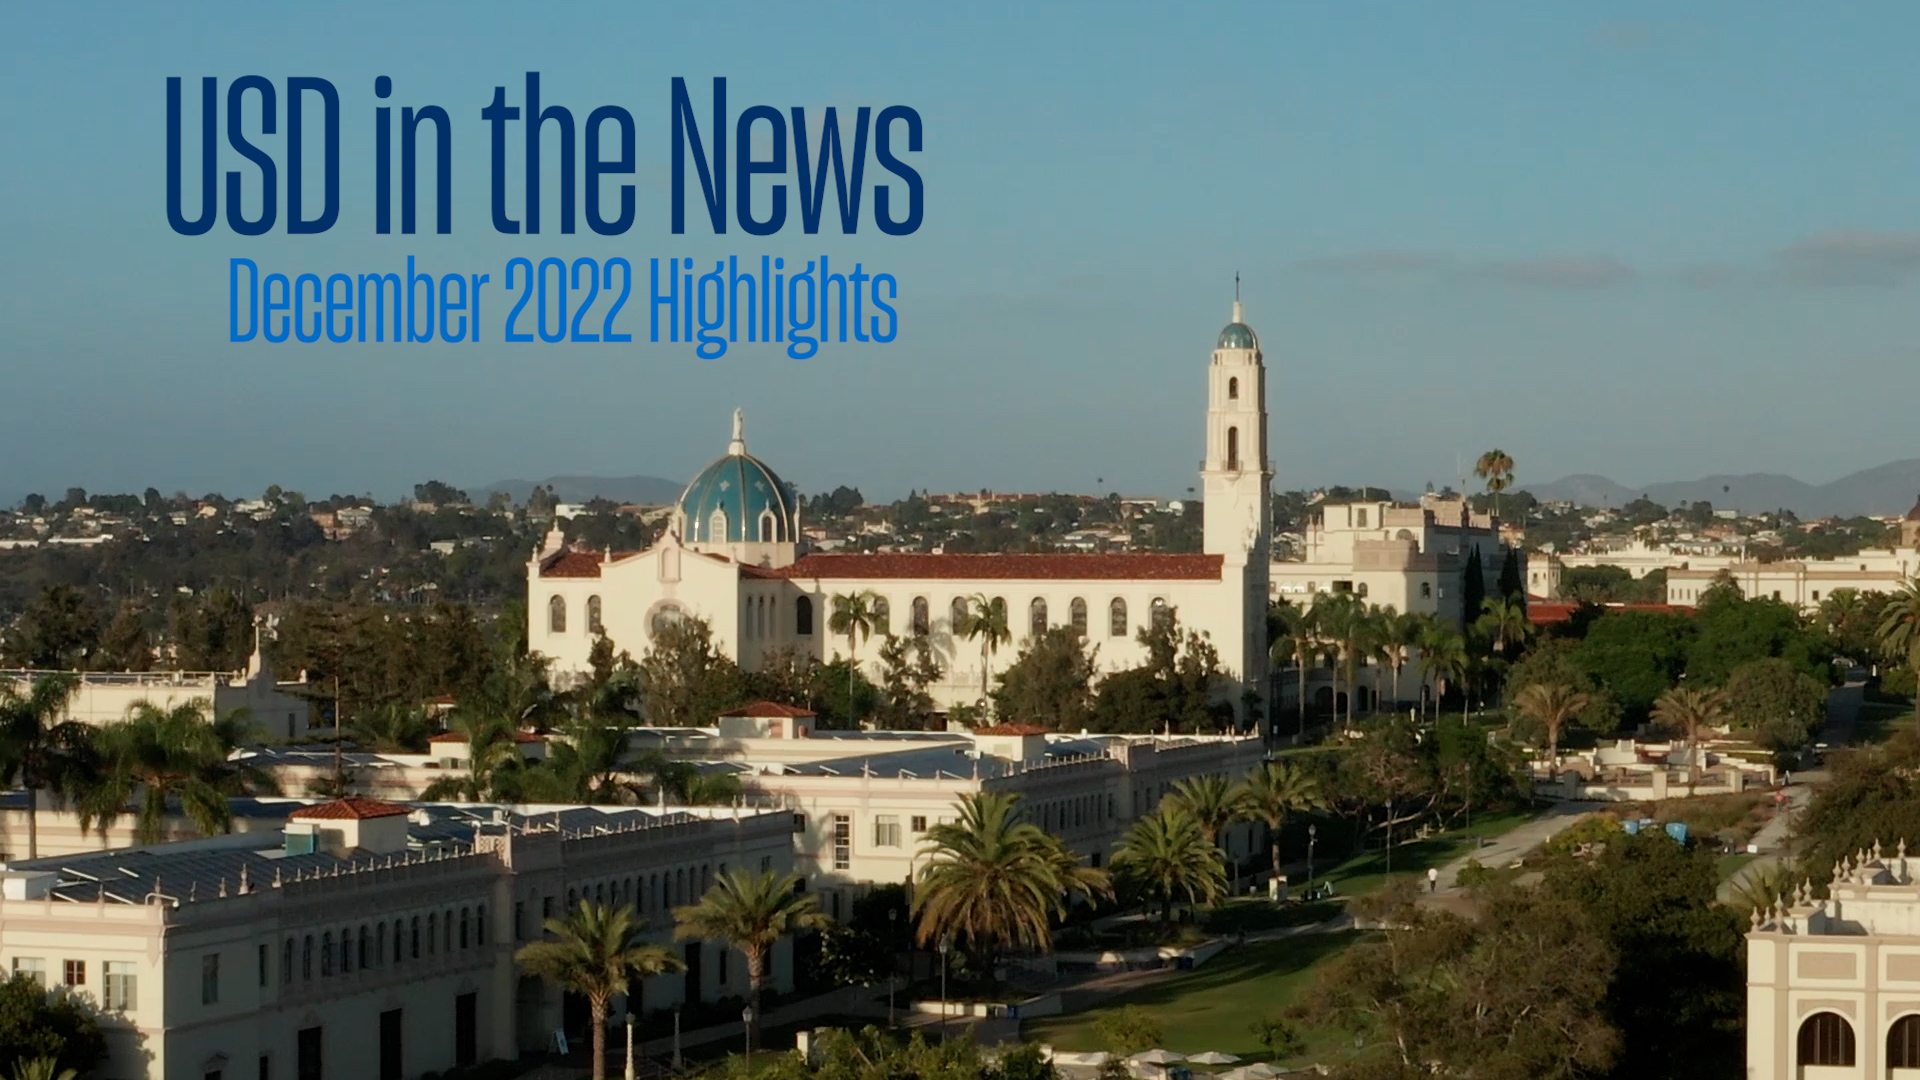 Video: USD in Highlights for December 2022 University of San Diego